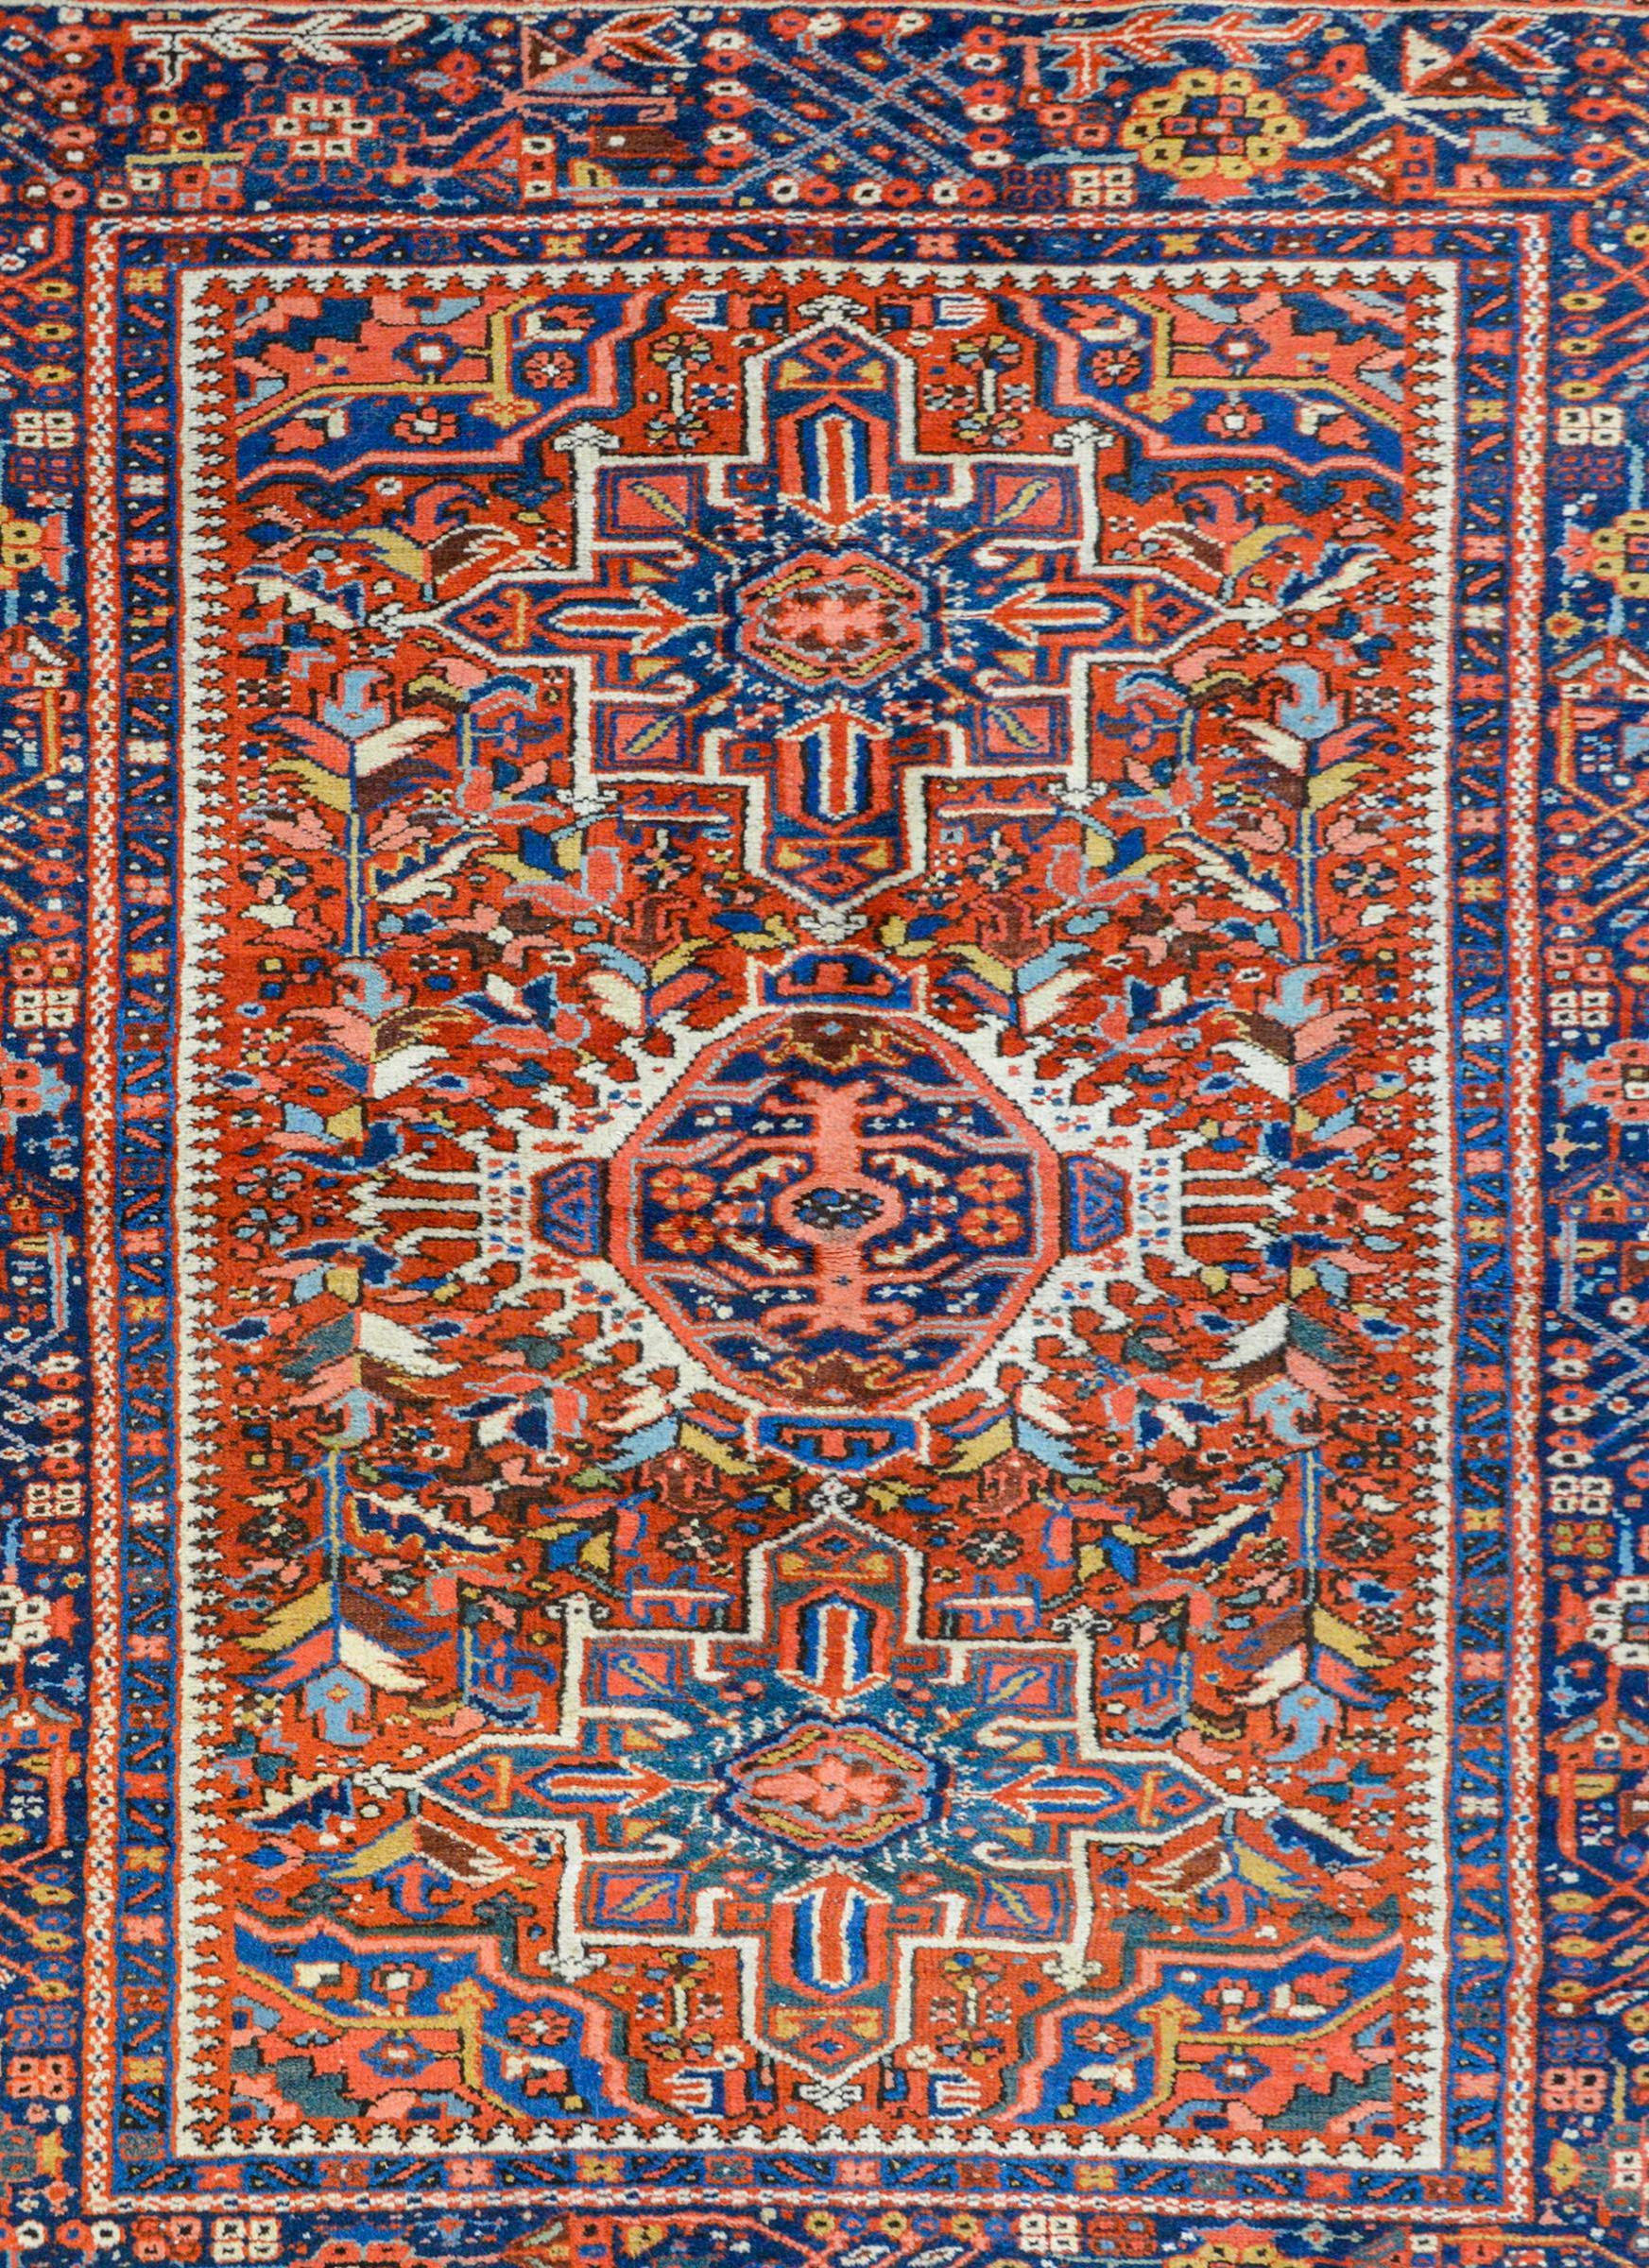 A beautiful early 20th century Persian Karajeh rug with three large medallions against an intricately woven field of myriad flowers and leaves, all woven in bright crimson, indigos, gold, green, and white colored wool. The border is equally